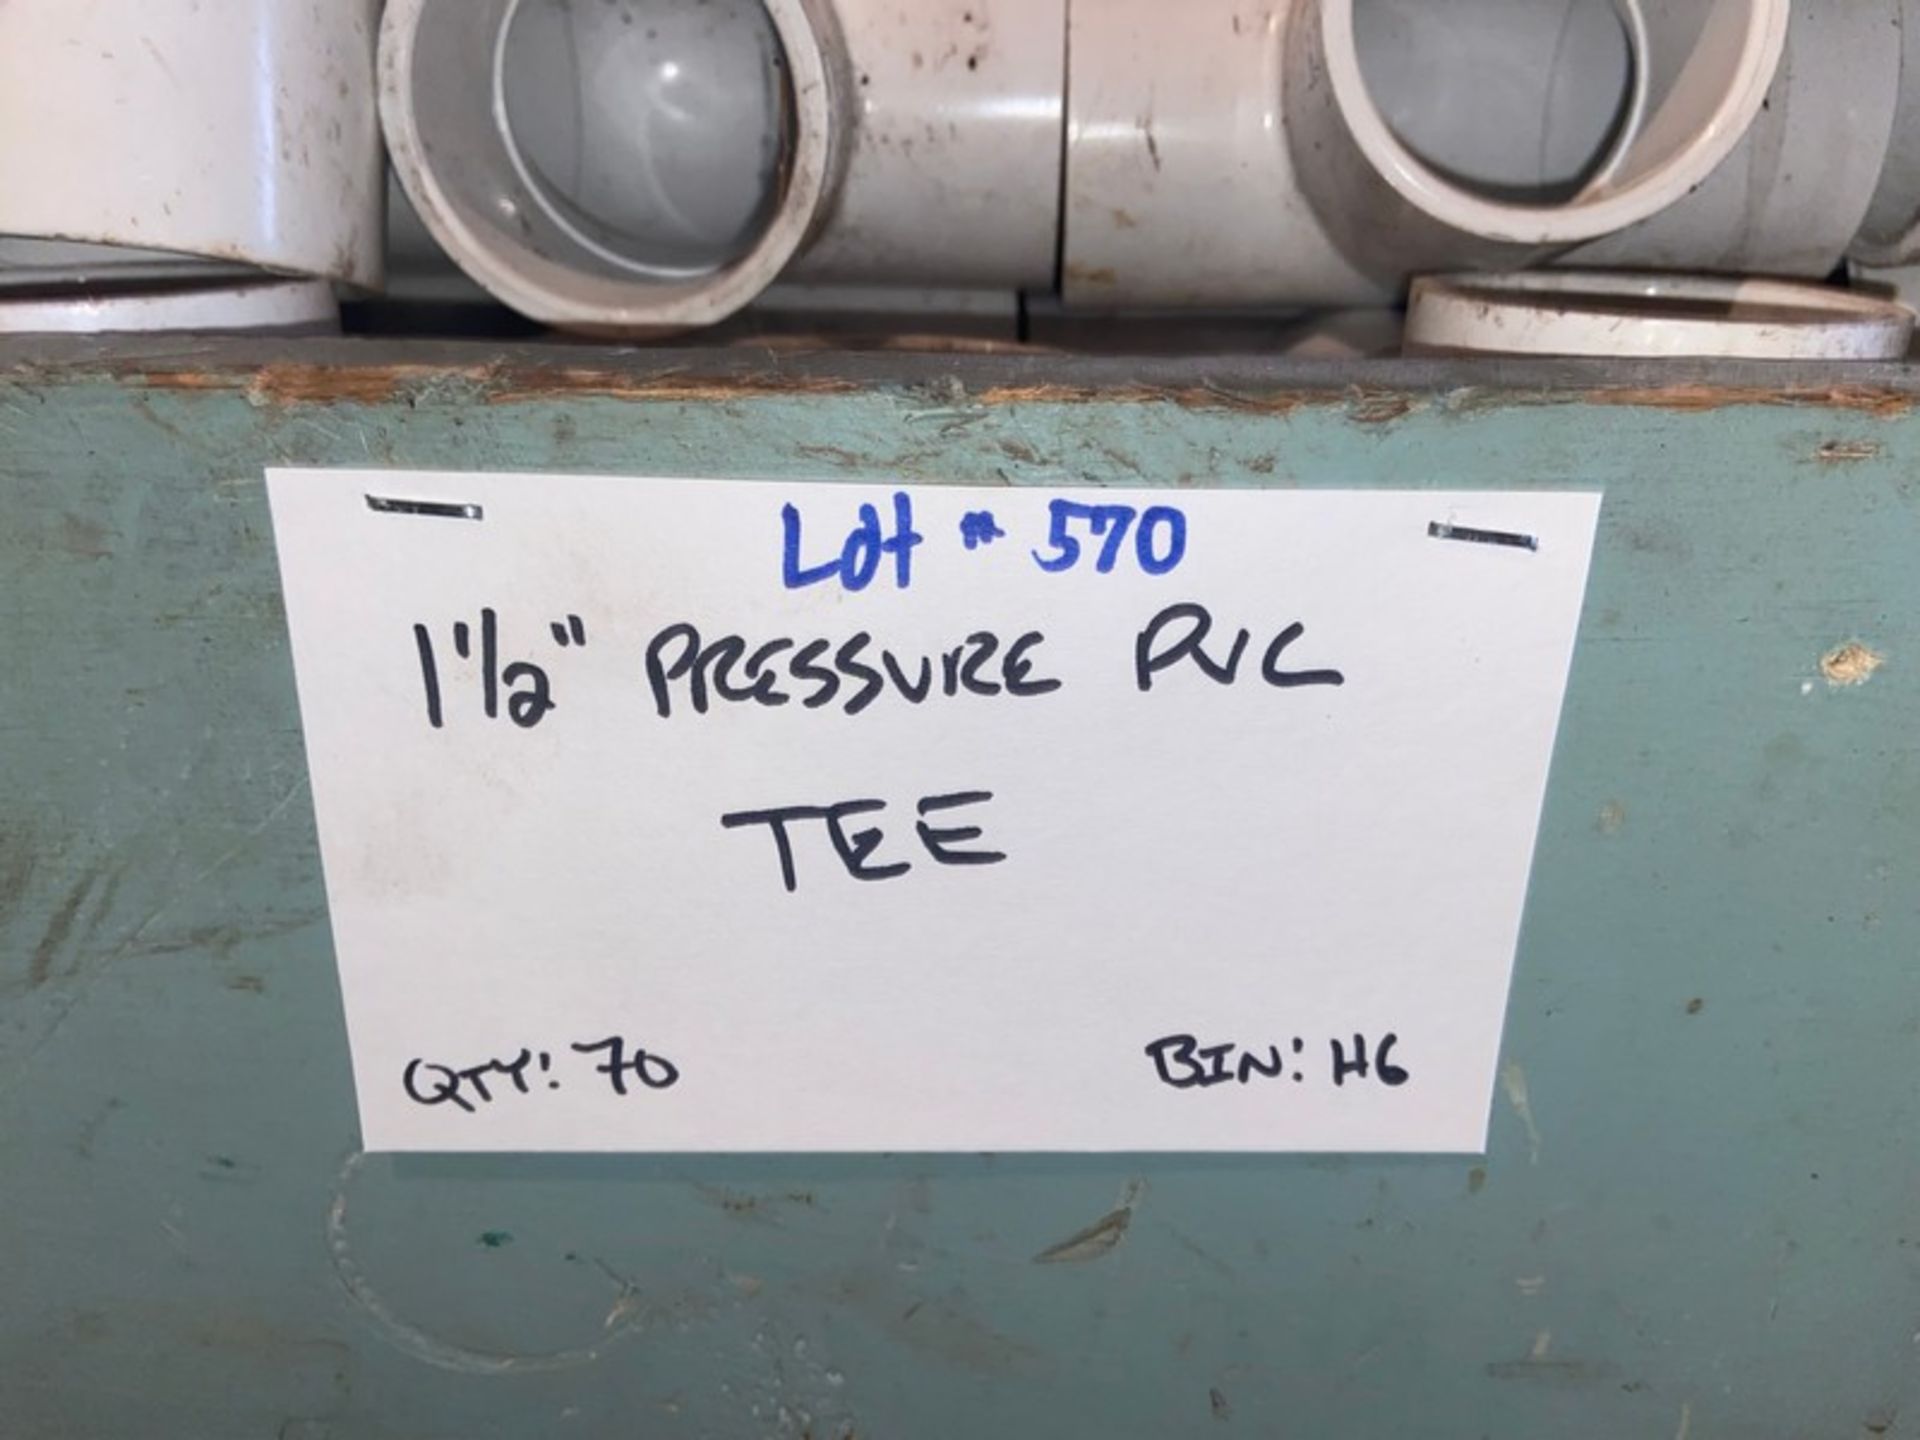 (70) 1-1/2" Pressure PVC Tee (Bin: H6) (LOCATED IN MONROEVILLE, PA) - Image 6 of 6